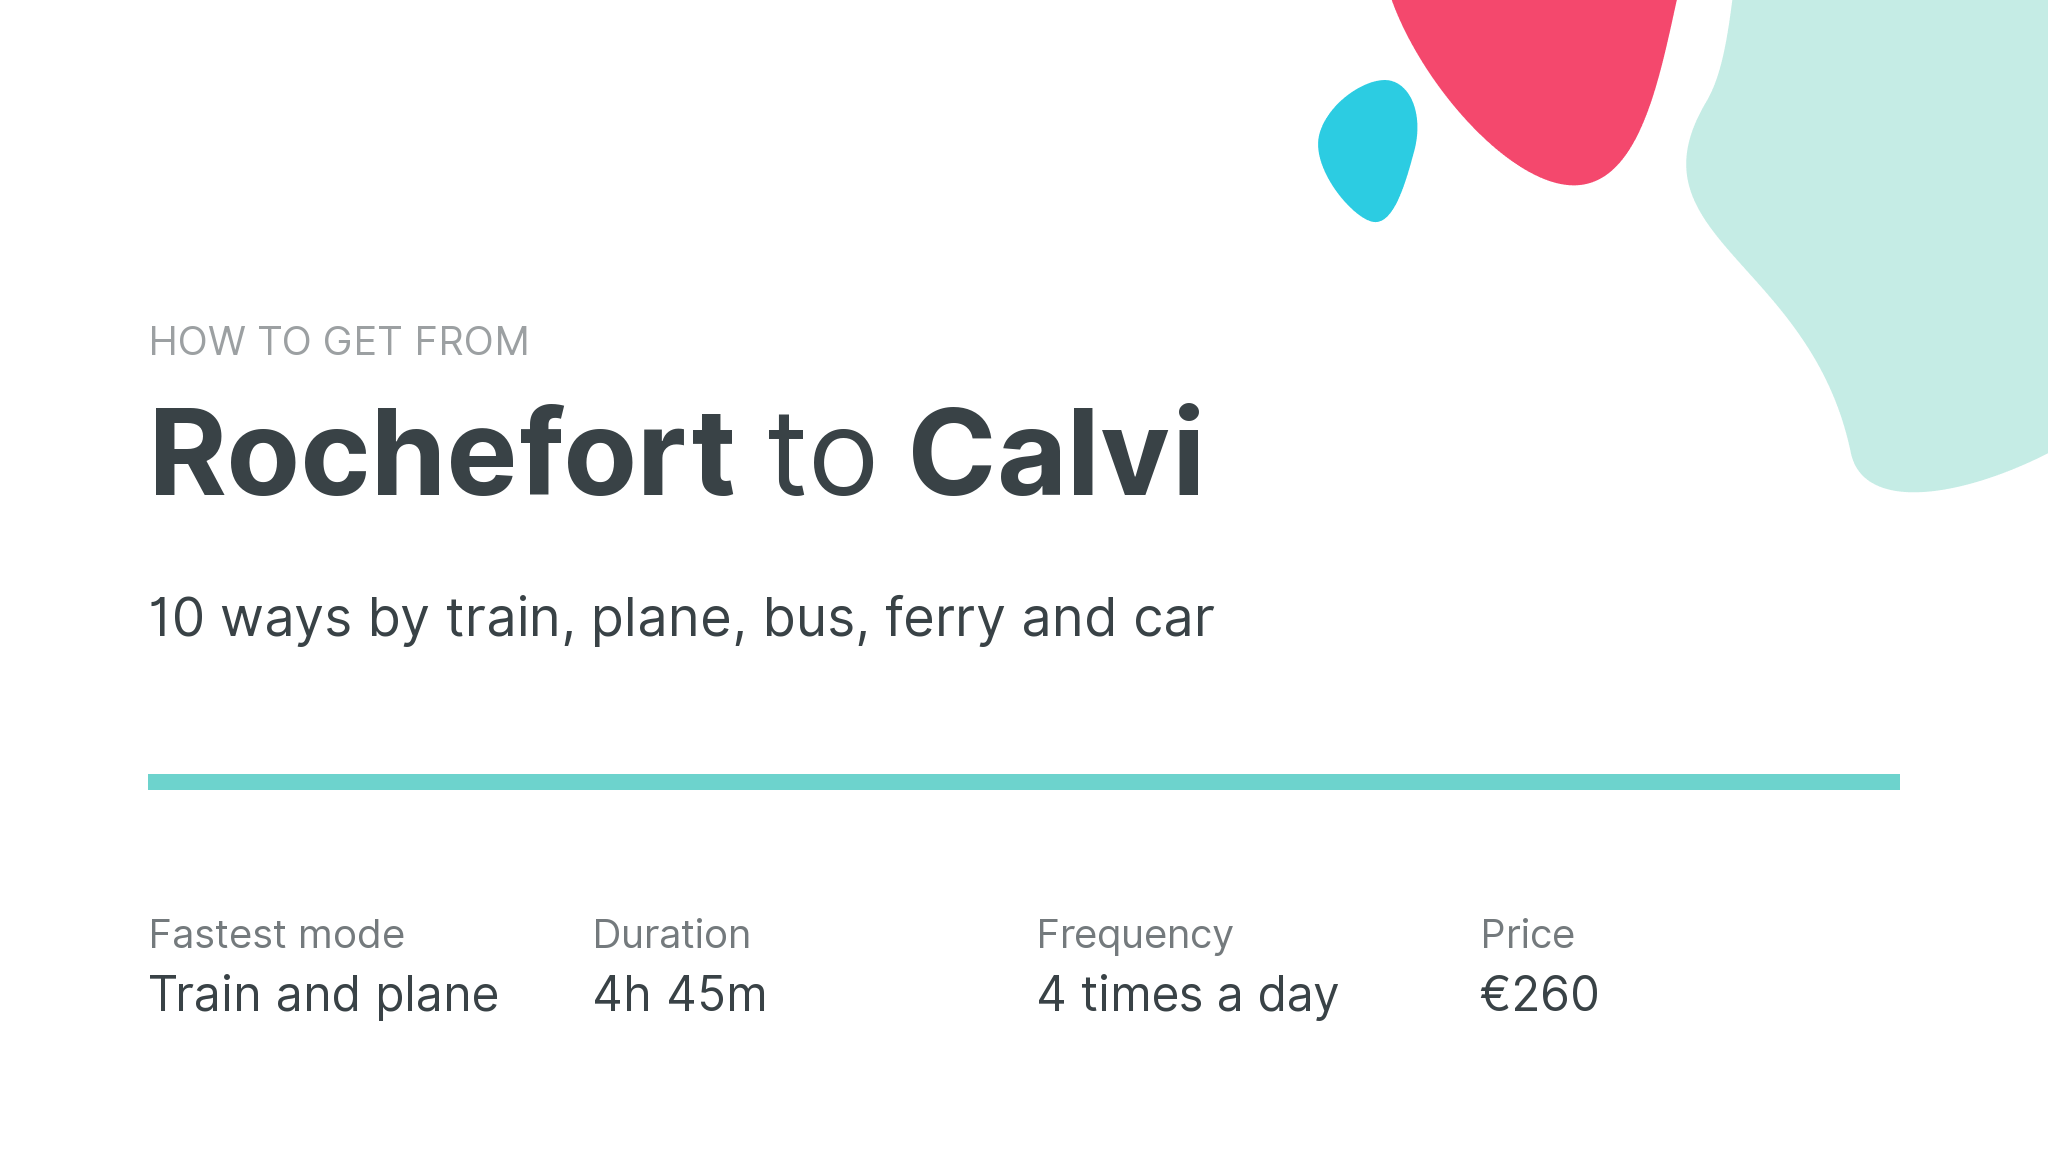 How do I get from Rochefort to Calvi